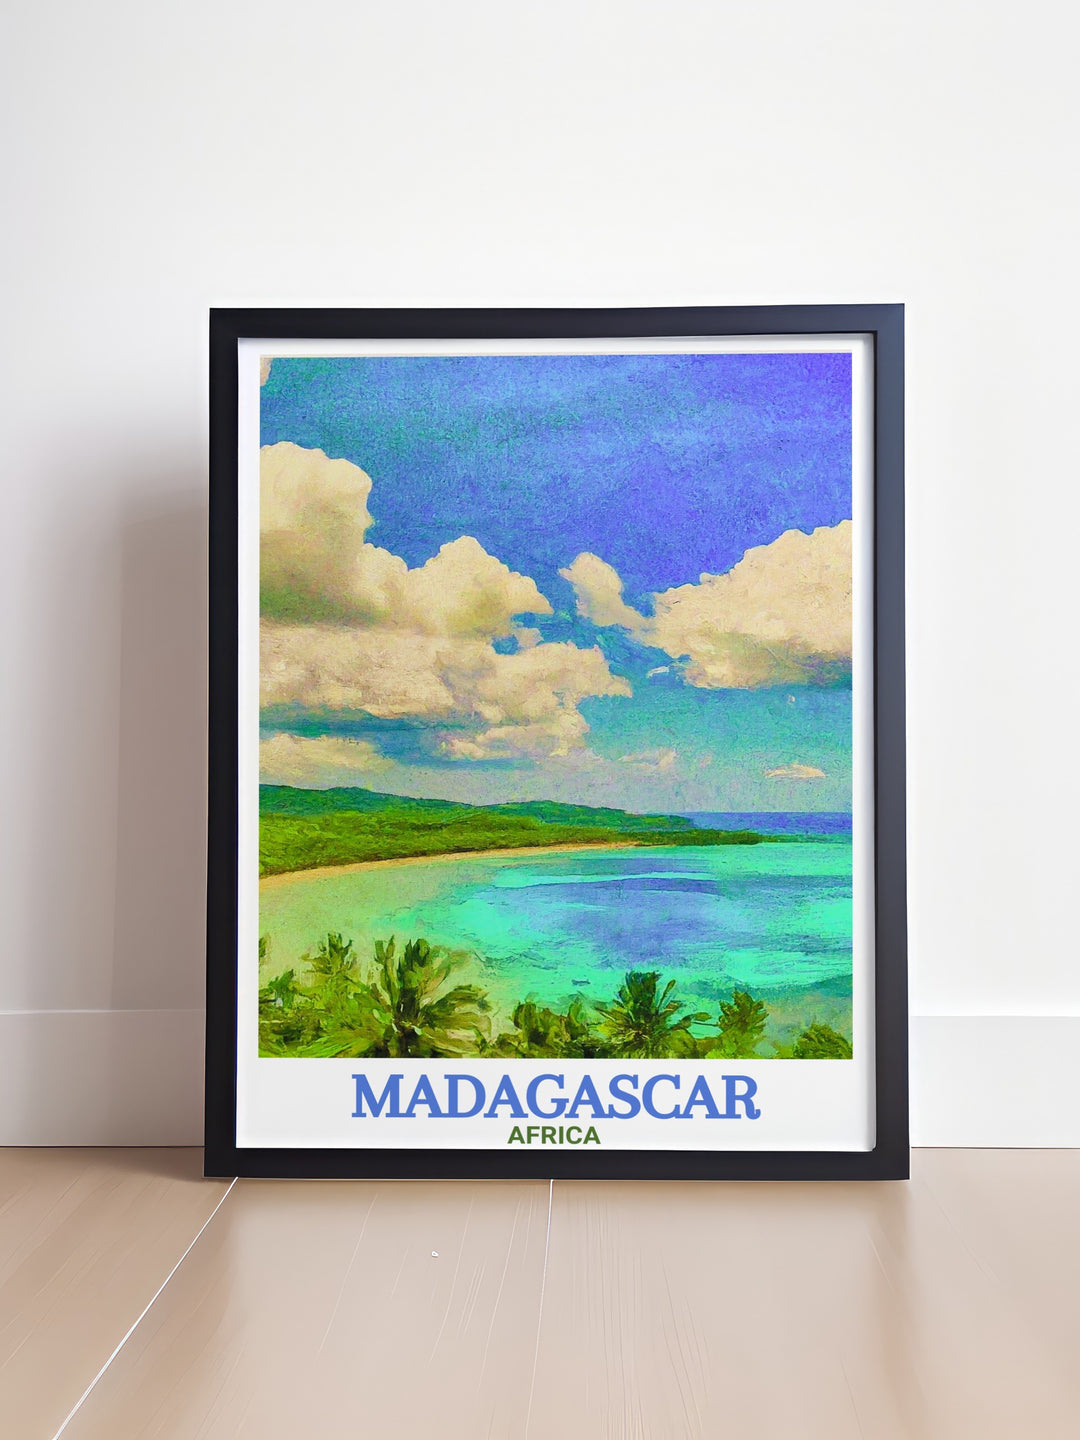 Nosy Be vintage print showcasing the timeless beauty of Madagascar perfect for Africa wall art and home decor a unique piece that blends vintage and modern aesthetics ideal for any art lover and travel enthusiast